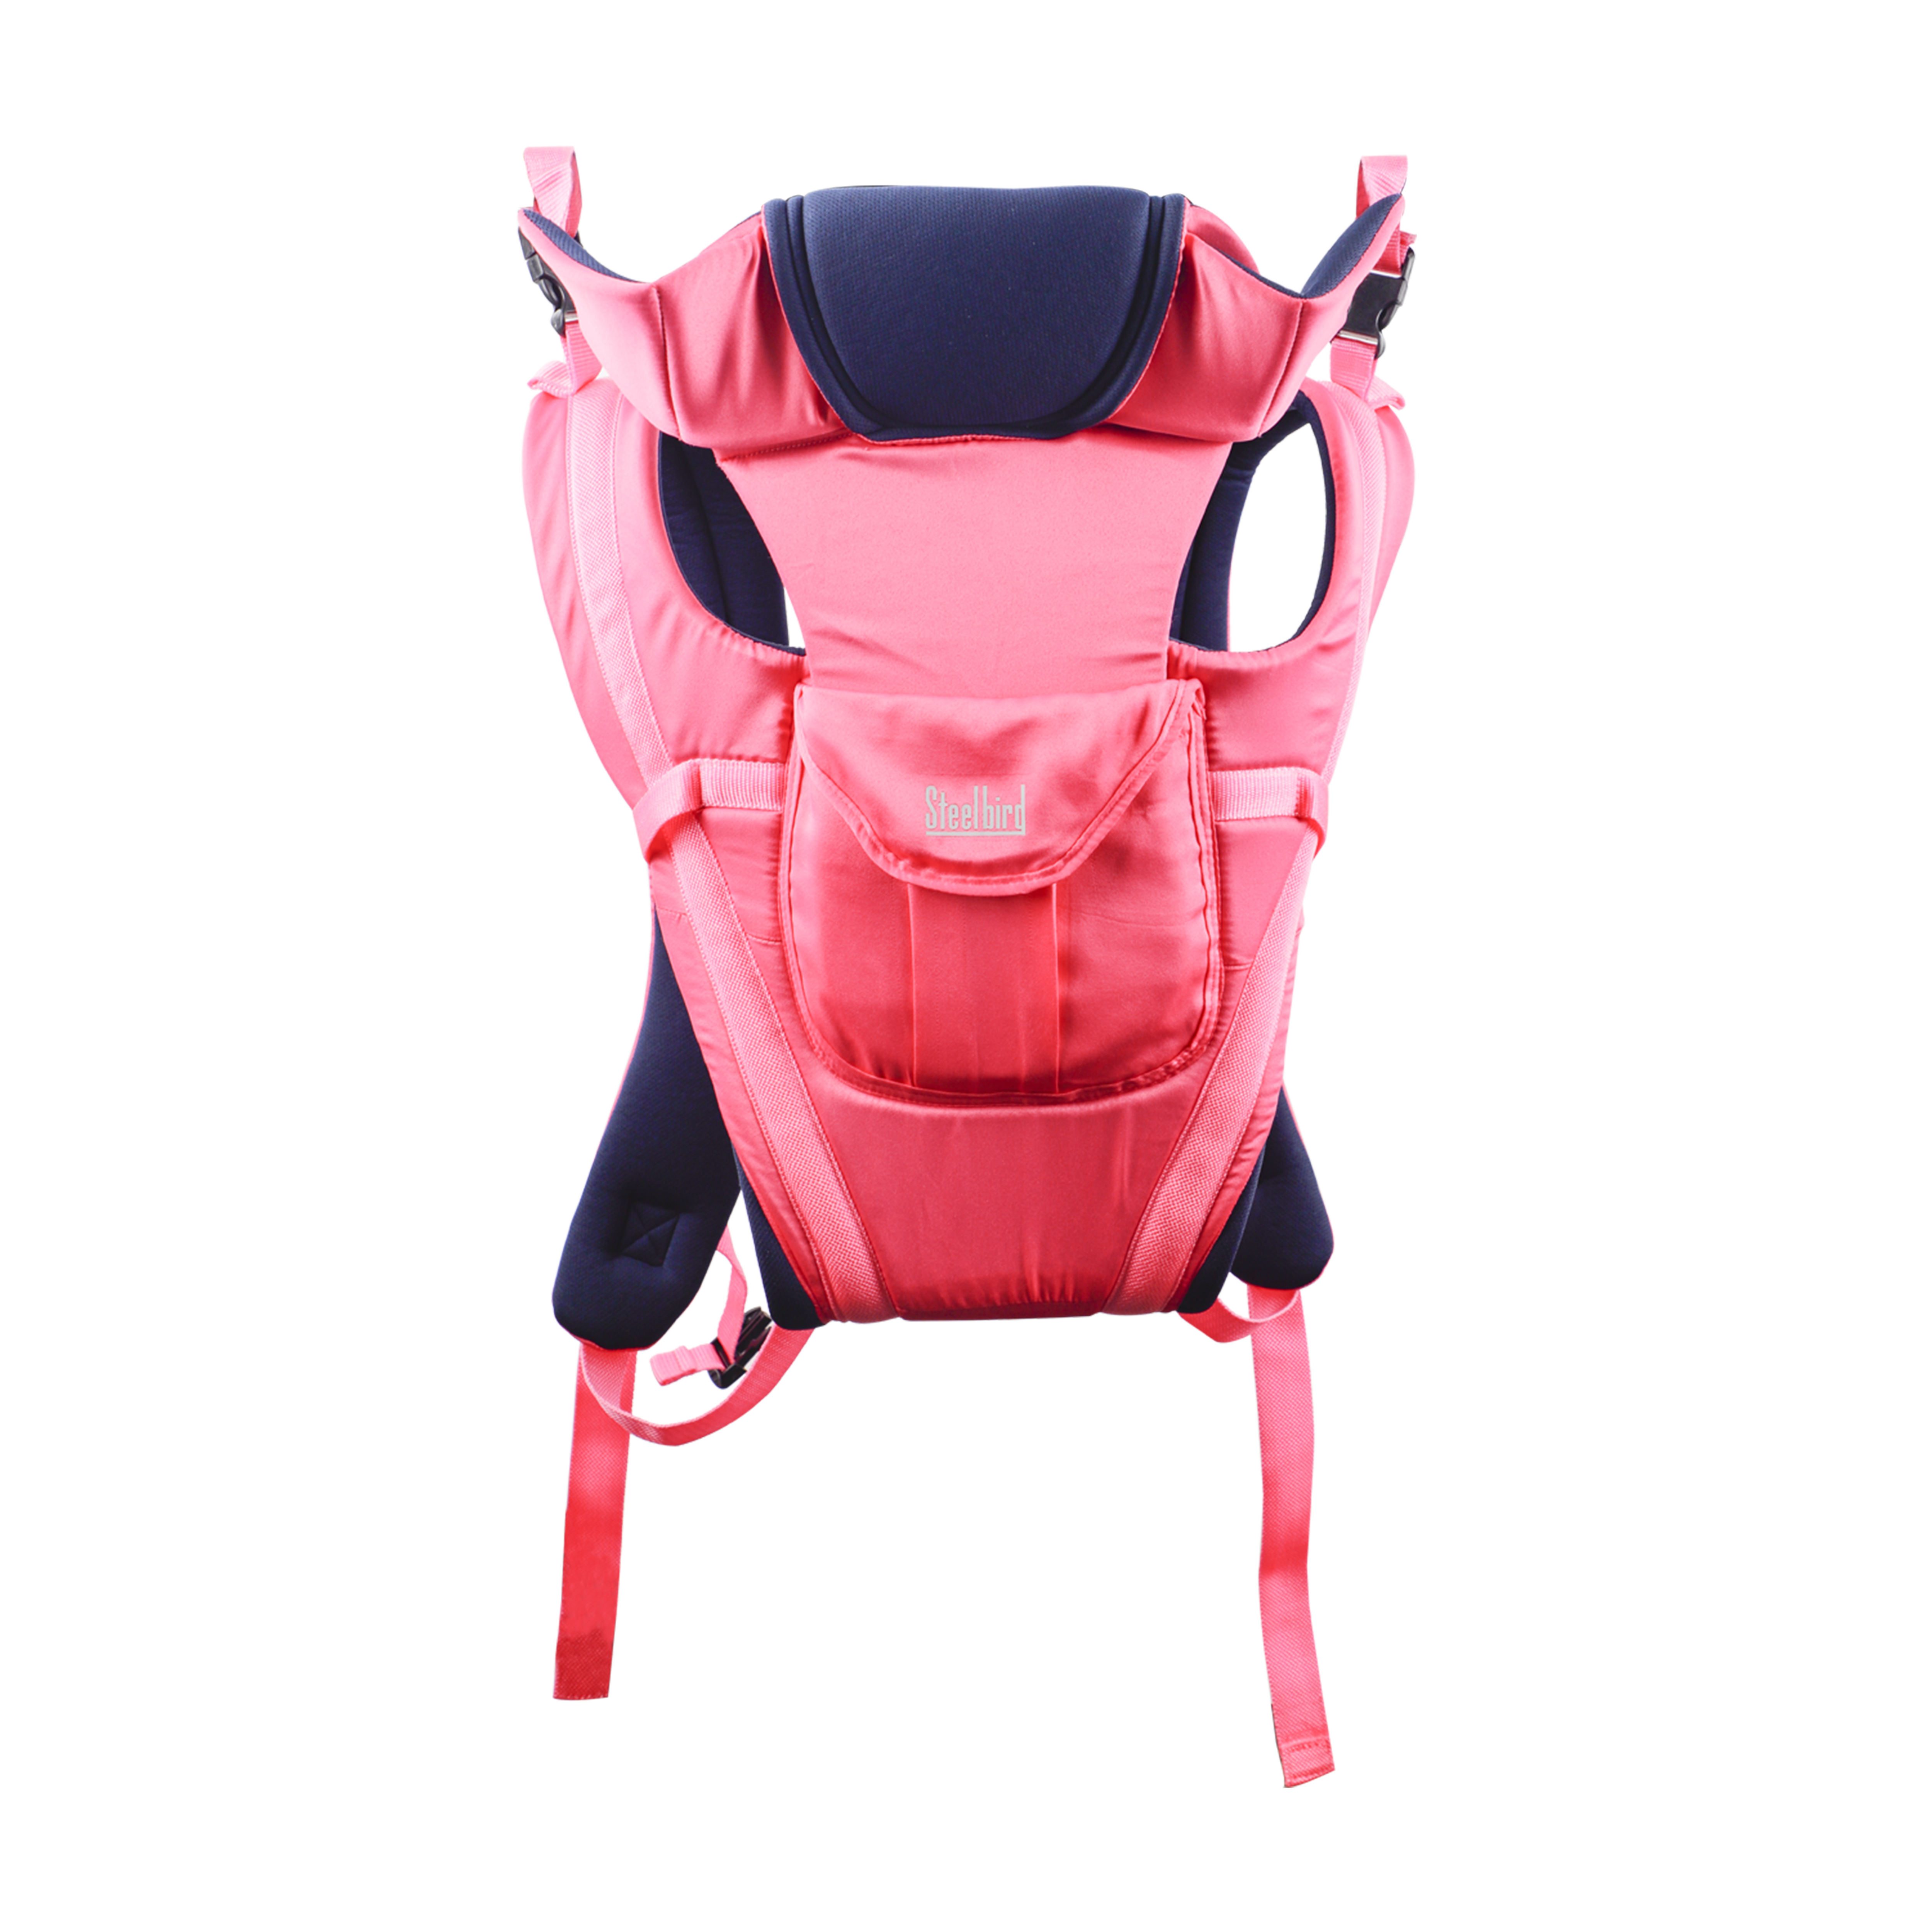 Steelbird Premium Kids 4-in-1 Adjustable Baby Carrier Cum Kangaroo Bag With Lumbar Support-Lightweight And Breathable-Back-Front Carrier For Baby With Safety Belt-Max Weight Up To 15 Kg (Blue Pink)